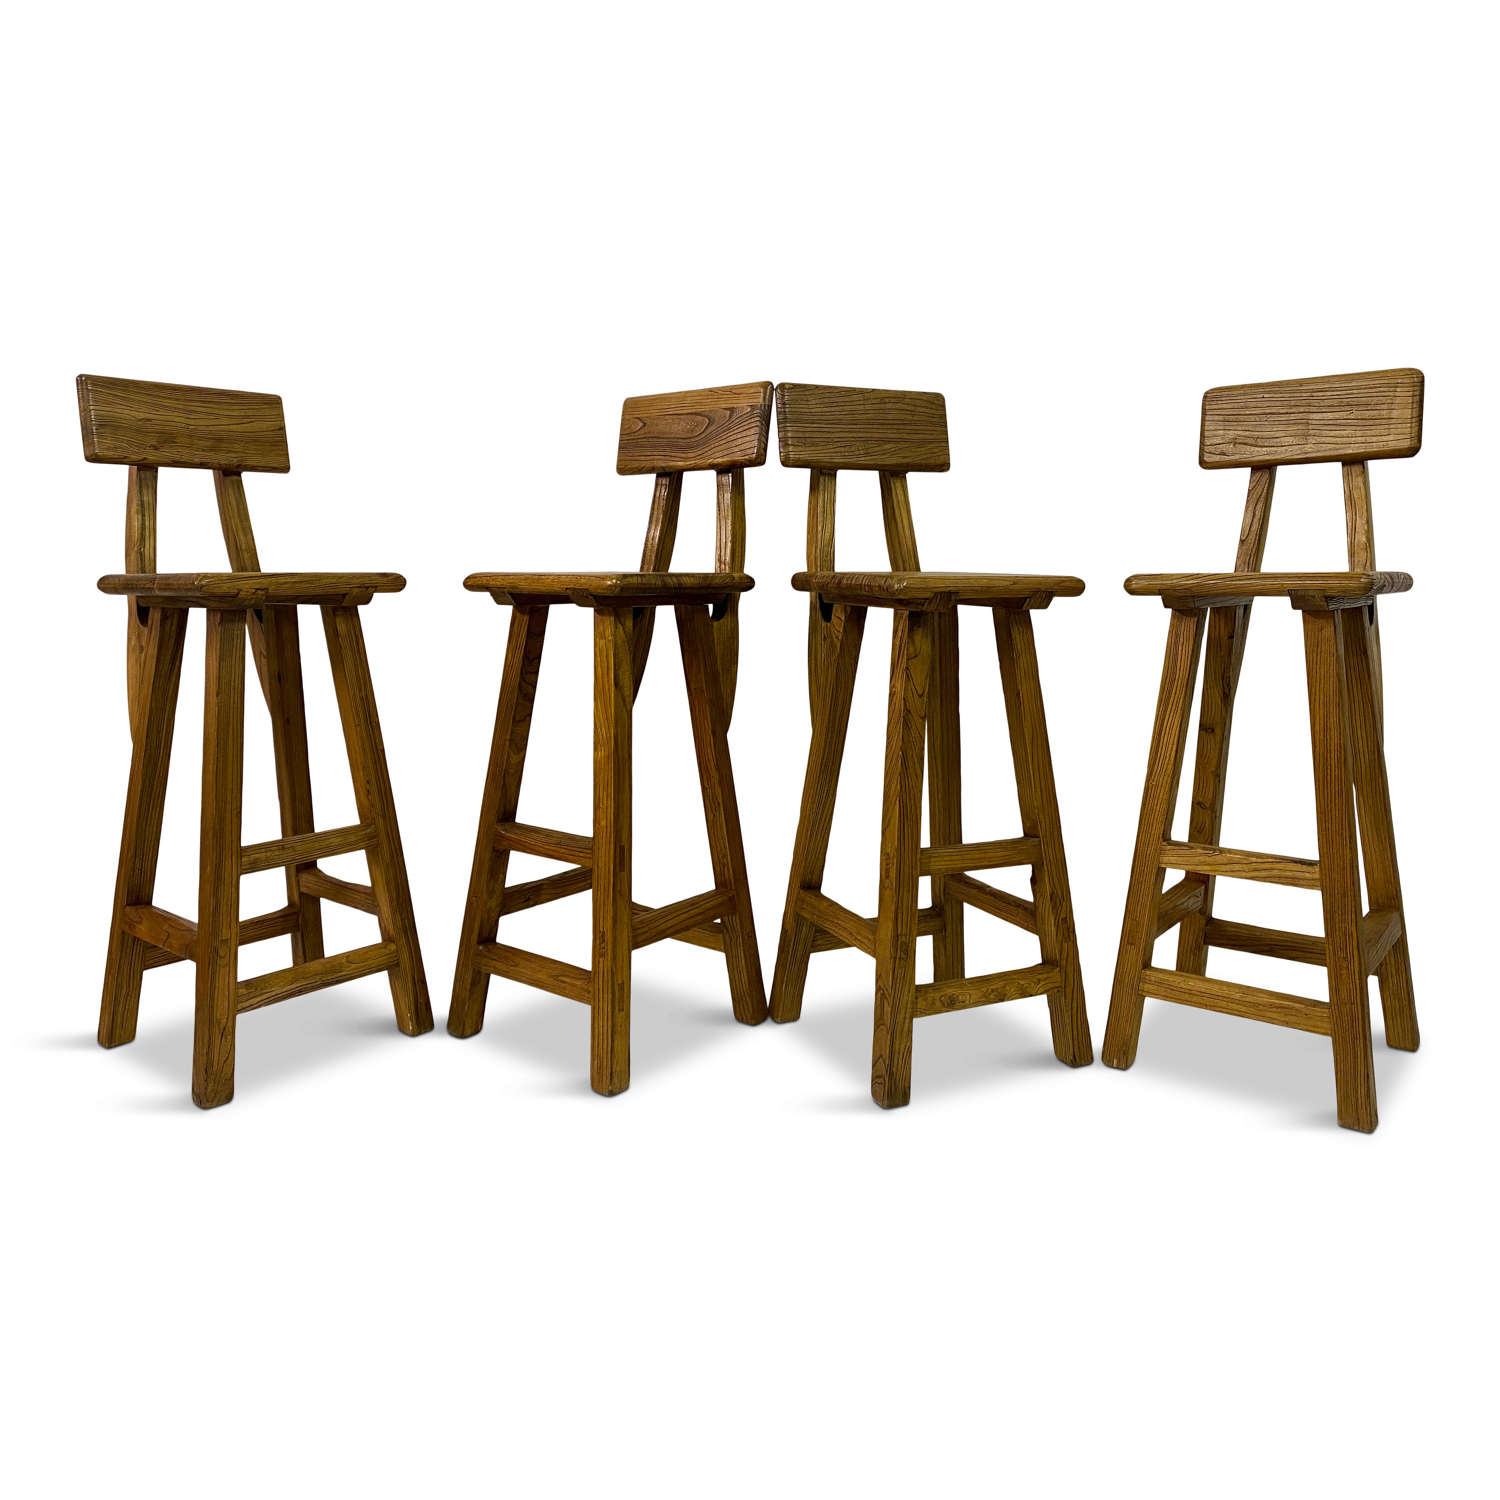 Set of Four French High Stools in Solid Elm